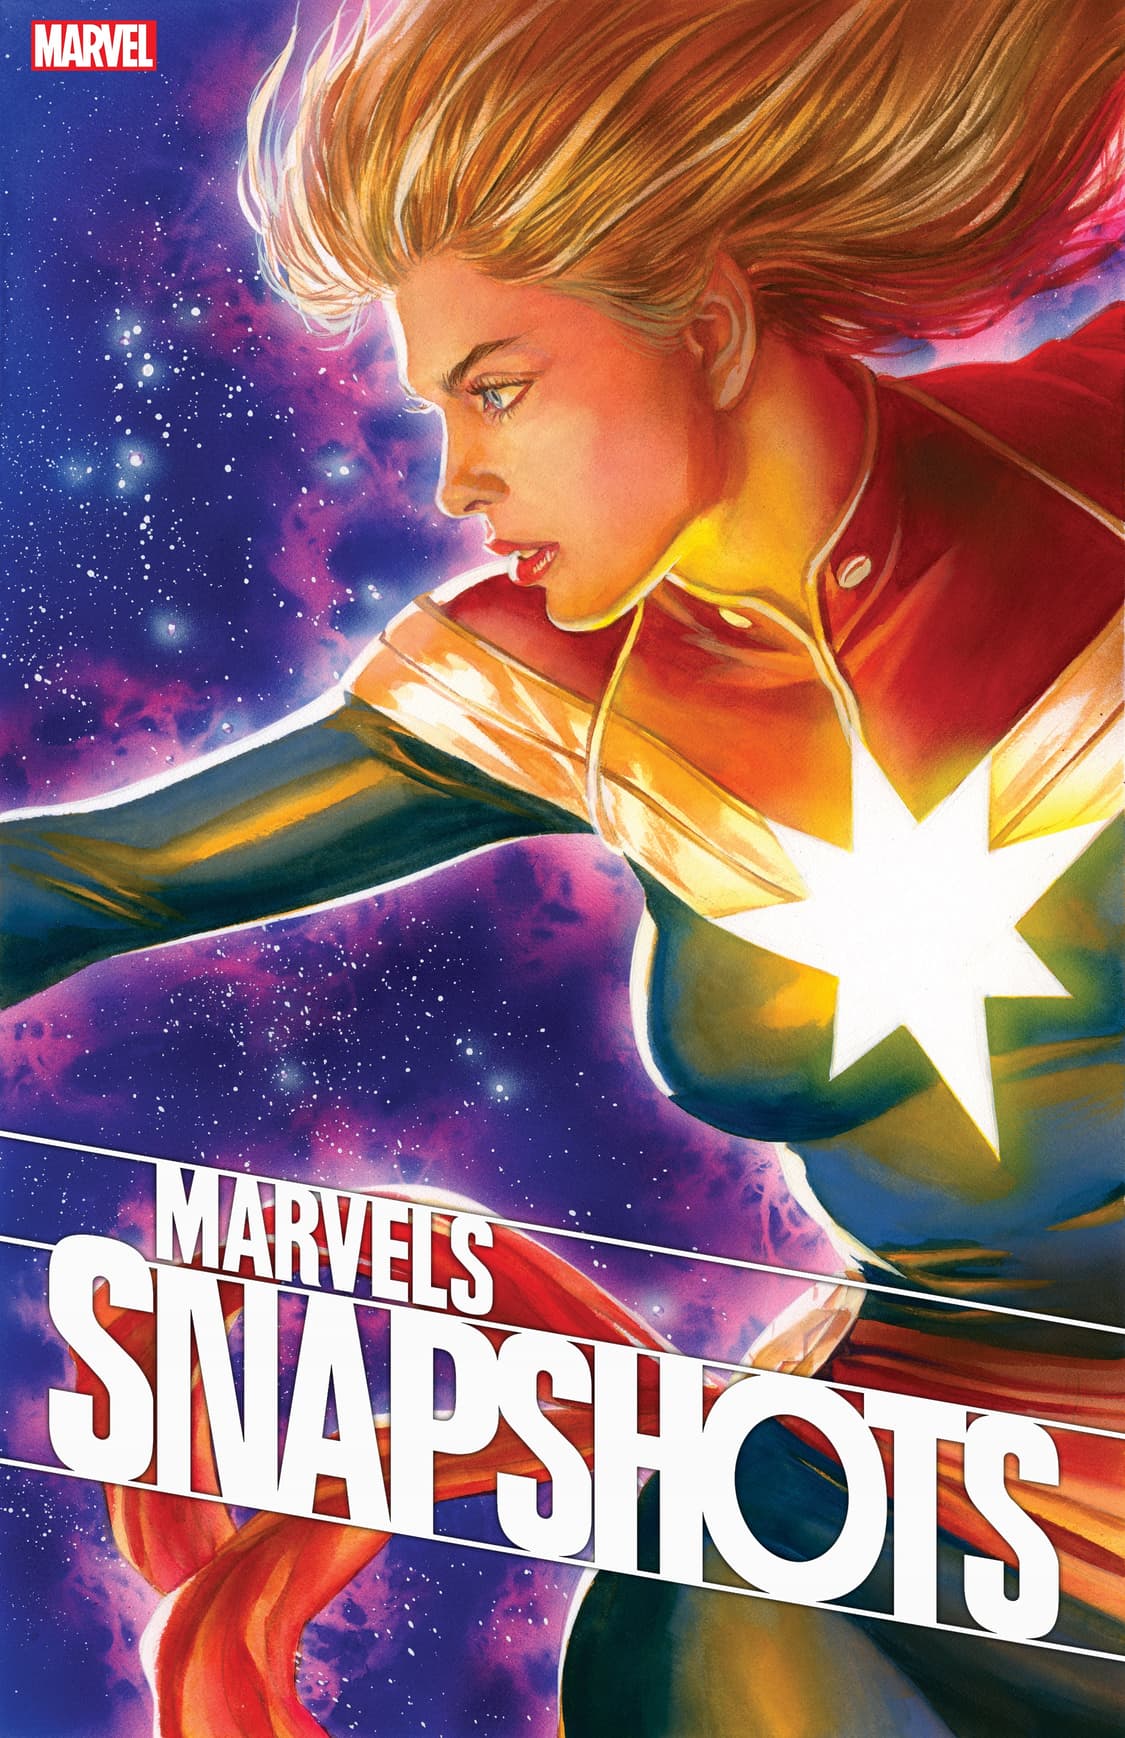 Marvels Snapshots: Captain Marvel #1 written by Mark Waid with art by Colleen Doran and cover by Alex Ross